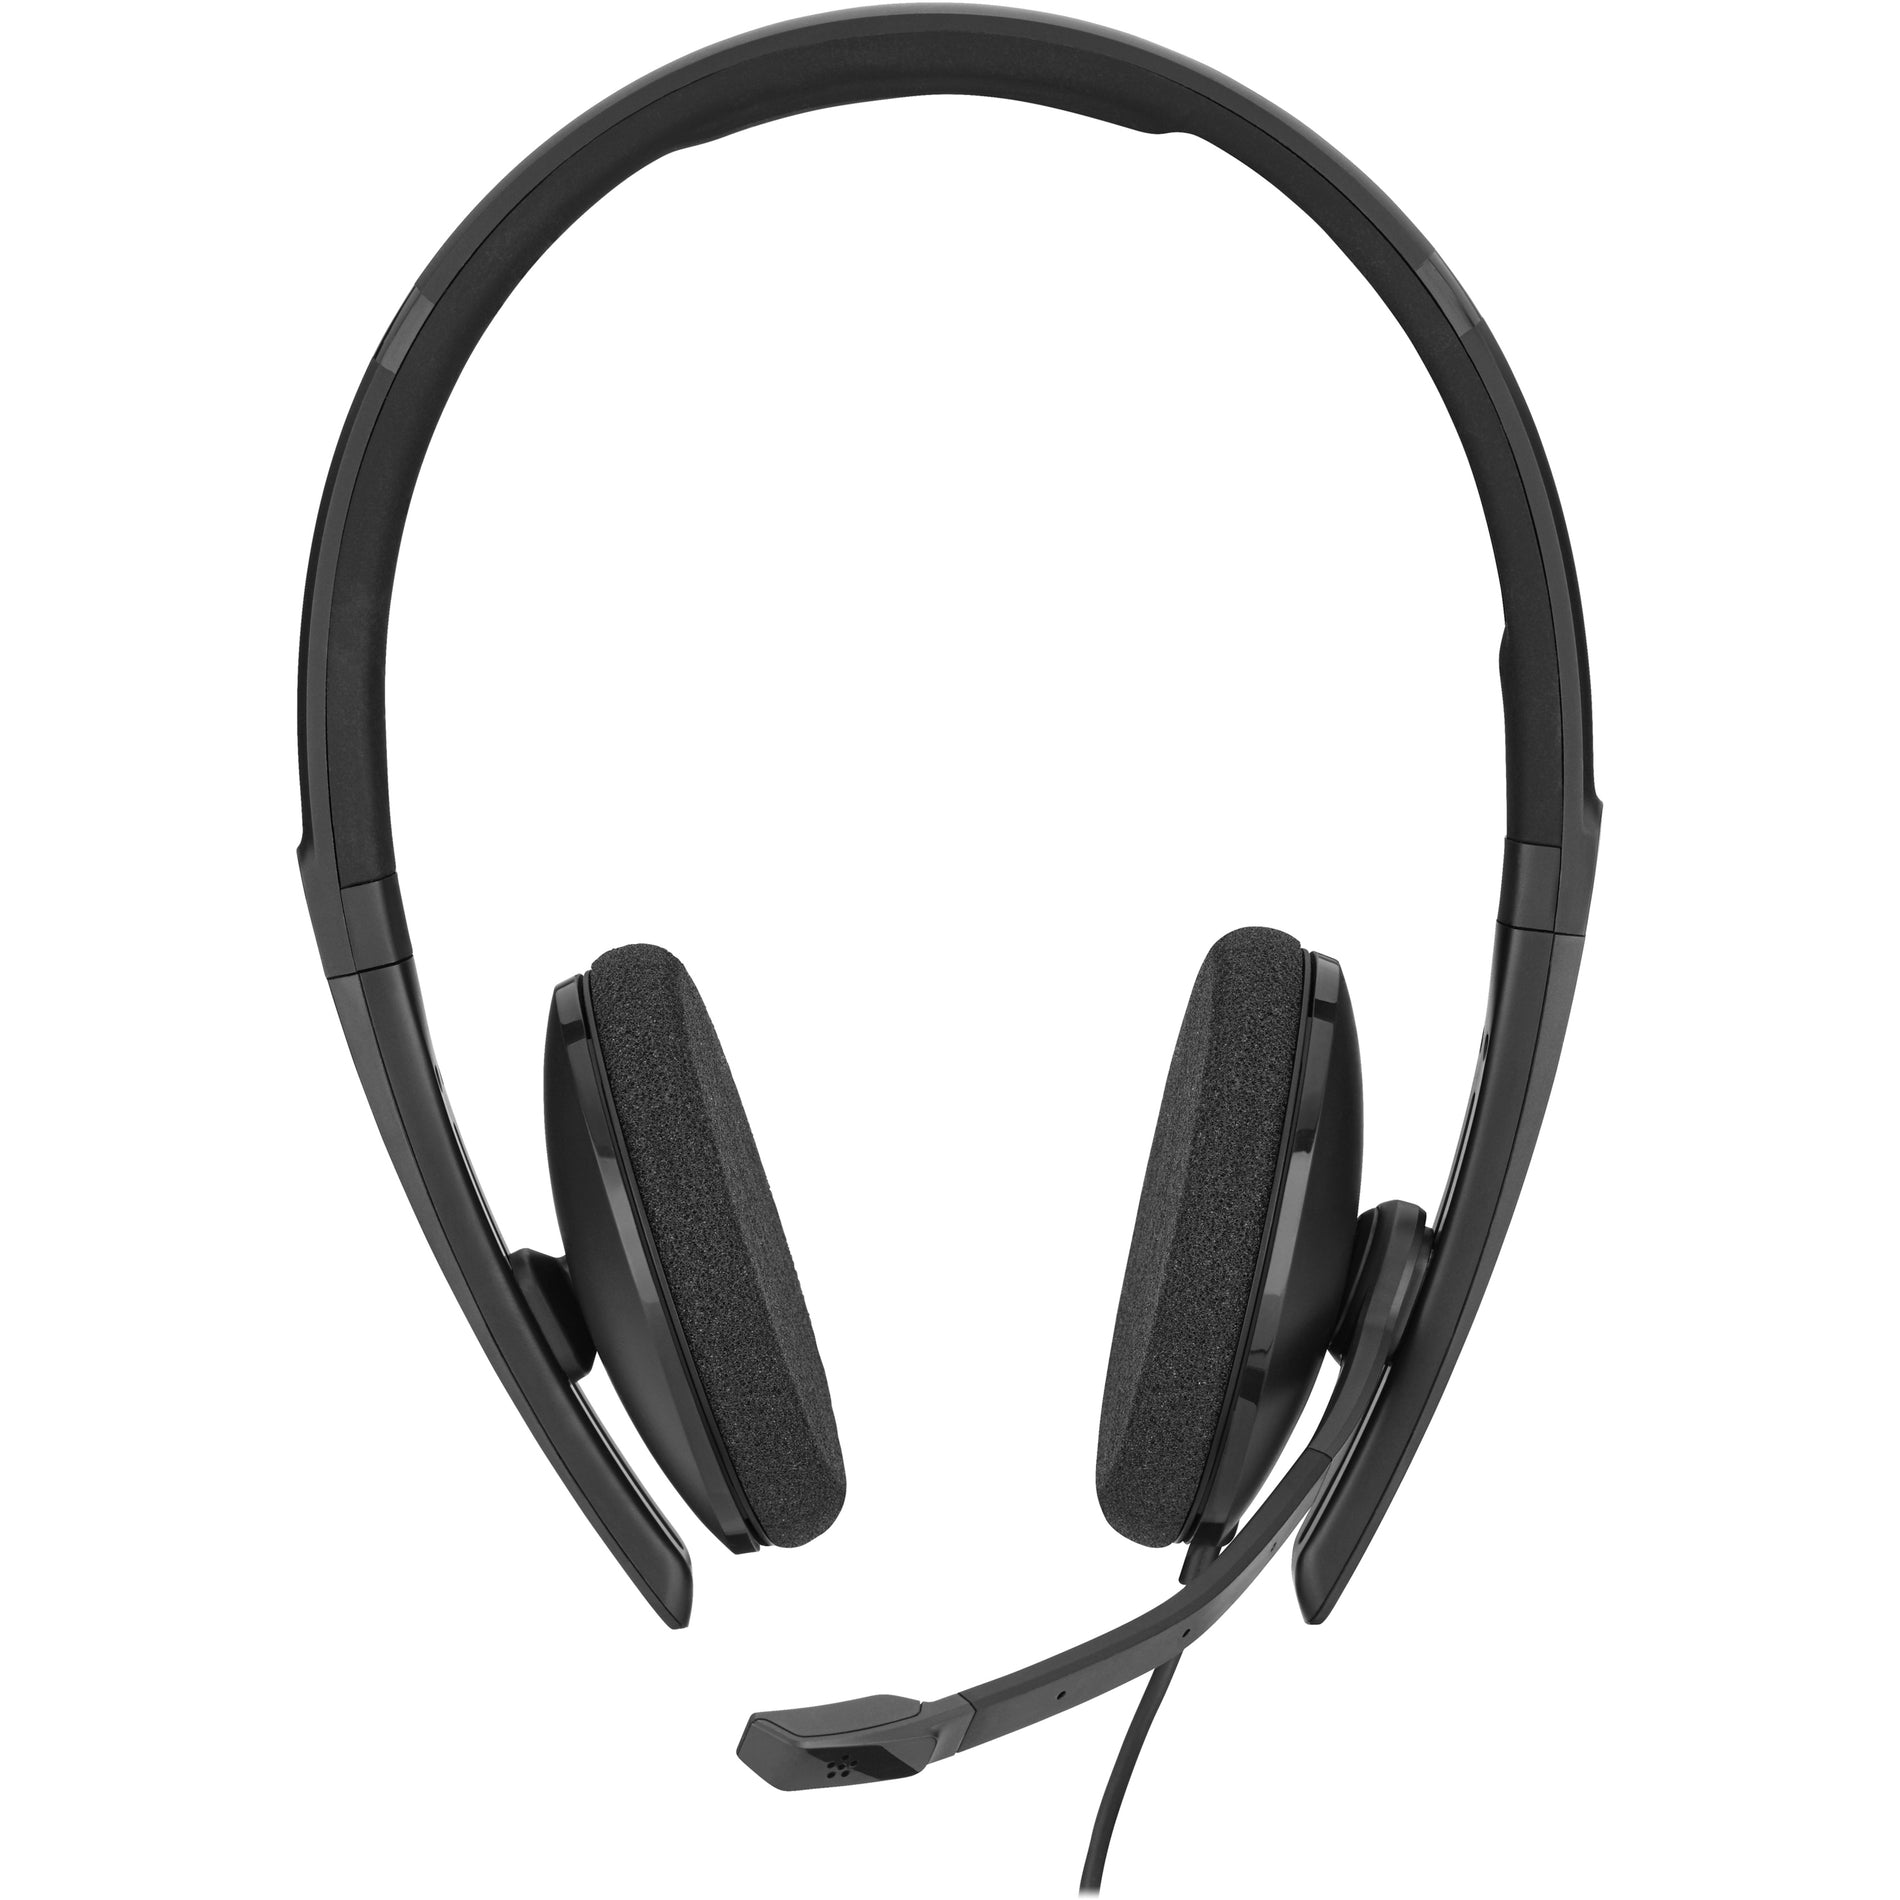 Sennheiser 508354 SC 160 USB-C Headset, Binaural Over-the-head Stereo Headset with Noise Cancelling Microphone